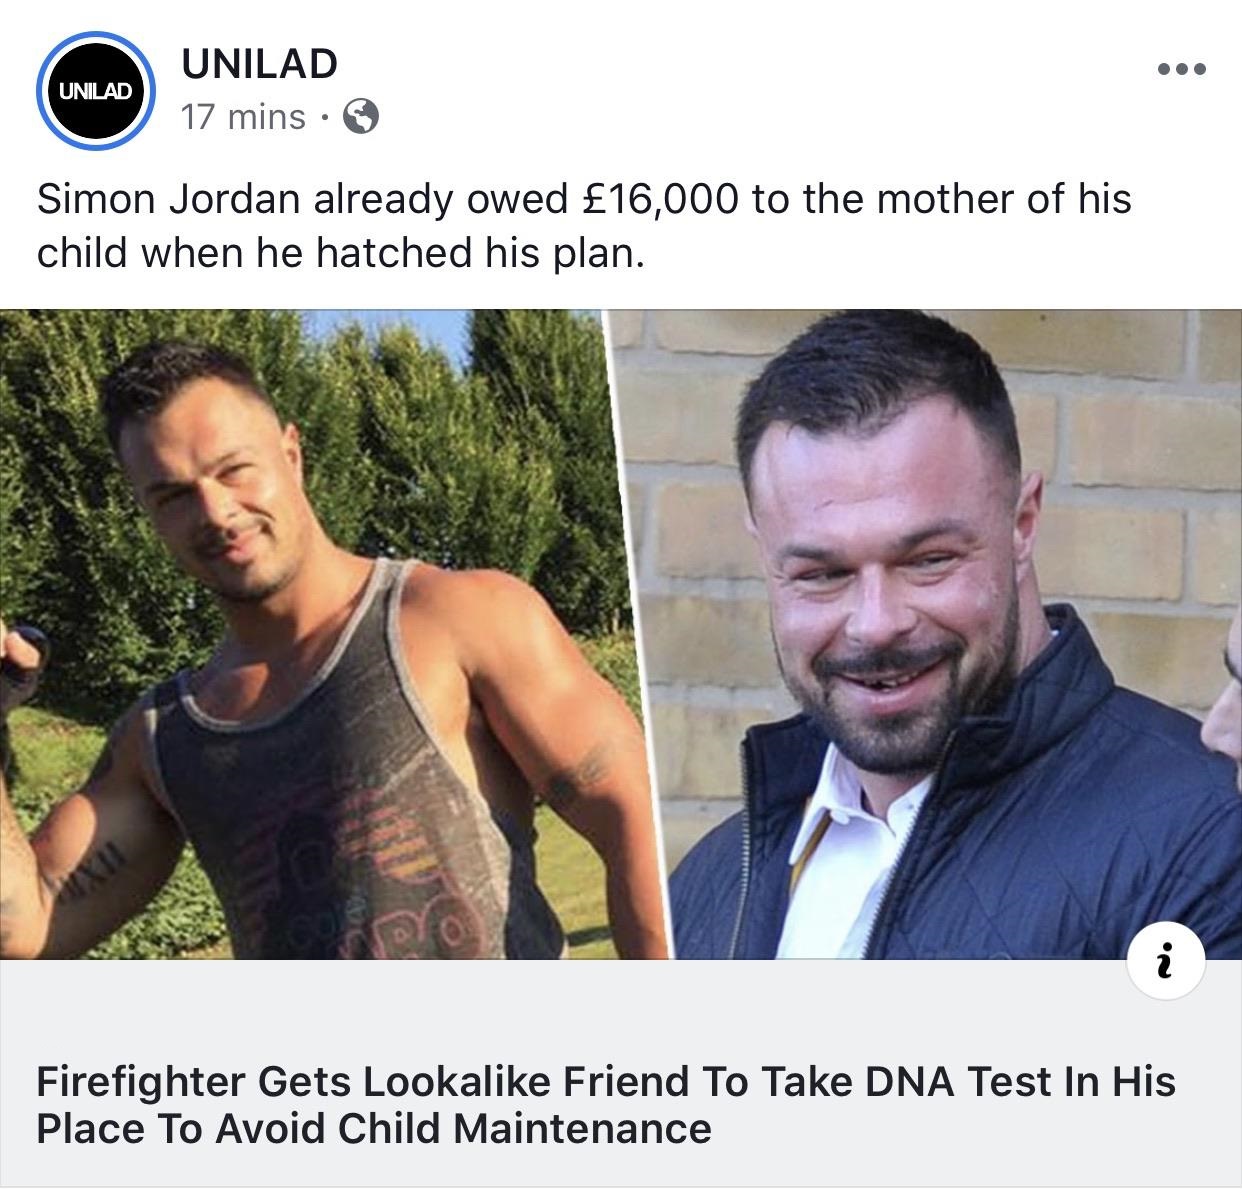 firefighter gets lookalike friend to take DNA test in his place to avoid child maintenance